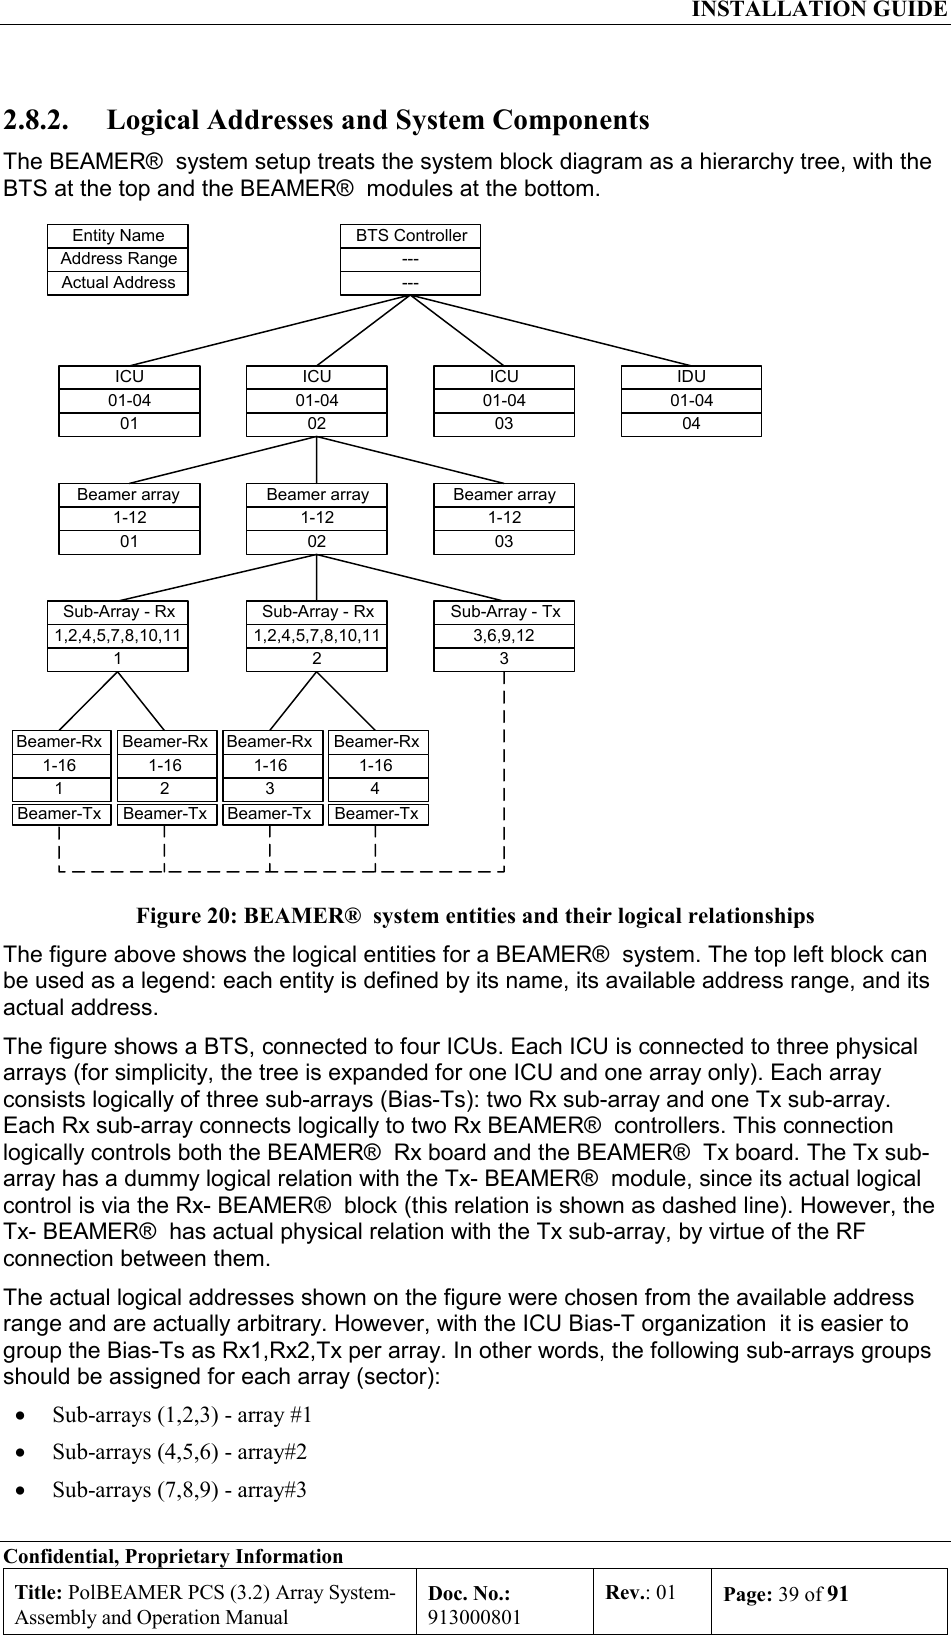  INSTALLATION GUIDE Confidential, Proprietary Information Title: PolBEAMER PCS (3.2) Array System- Assembly and Operation Manual Doc. No.: 913000801 Rev.: 01  Page: 39 of 91  2.8.2.  Logical Addresses and System Components The BEAMER®  system setup treats the system block diagram as a hierarchy tree, with the BTS at the top and the BEAMER®  modules at the bottom. Figure 20: BEAMER®  system entities and their logical relationships The figure above shows the logical entities for a BEAMER®  system. The top left block can be used as a legend: each entity is defined by its name, its available address range, and its actual address. The figure shows a BTS, connected to four ICUs. Each ICU is connected to three physical arrays (for simplicity, the tree is expanded for one ICU and one array only). Each array consists logically of three sub-arrays (Bias-Ts): two Rx sub-array and one Tx sub-array. Each Rx sub-array connects logically to two Rx BEAMER®  controllers. This connection logically controls both the BEAMER®  Rx board and the BEAMER®  Tx board. The Tx sub-array has a dummy logical relation with the Tx- BEAMER®  module, since its actual logical control is via the Rx- BEAMER®  block (this relation is shown as dashed line). However, the Tx- BEAMER®  has actual physical relation with the Tx sub-array, by virtue of the RF connection between them. The actual logical addresses shown on the figure were chosen from the available address range and are actually arbitrary. However, with the ICU Bias-T organization  it is easier to group the Bias-Ts as Rx1,Rx2,Tx per array. In other words, the following sub-arrays groups should be assigned for each array (sector): •  Sub-arrays (1,2,3) - array #1 •  Sub-arrays (4,5,6) - array#2 •  Sub-arrays (7,8,9) - array#3 Entity NameAddress RangeActual AddressBTS Controller------ICU01-0402ICU01-0401ICU01-0403IDU01-0404Beamer array1-1202Beamer array1-1203Beamer array1-1201Sub-Array - Rx1,2,4,5,7,8,10,112Sub-Array - Rx1,2,4,5,7,8,10,111Sub-Array - Tx3,6,9,123Beamer-Rx1-164Beamer-TxBeamer-Rx1-163Beamer-TxBeamer-Rx1-162Beamer-TxBeamer-Rx1-161Beamer-Tx